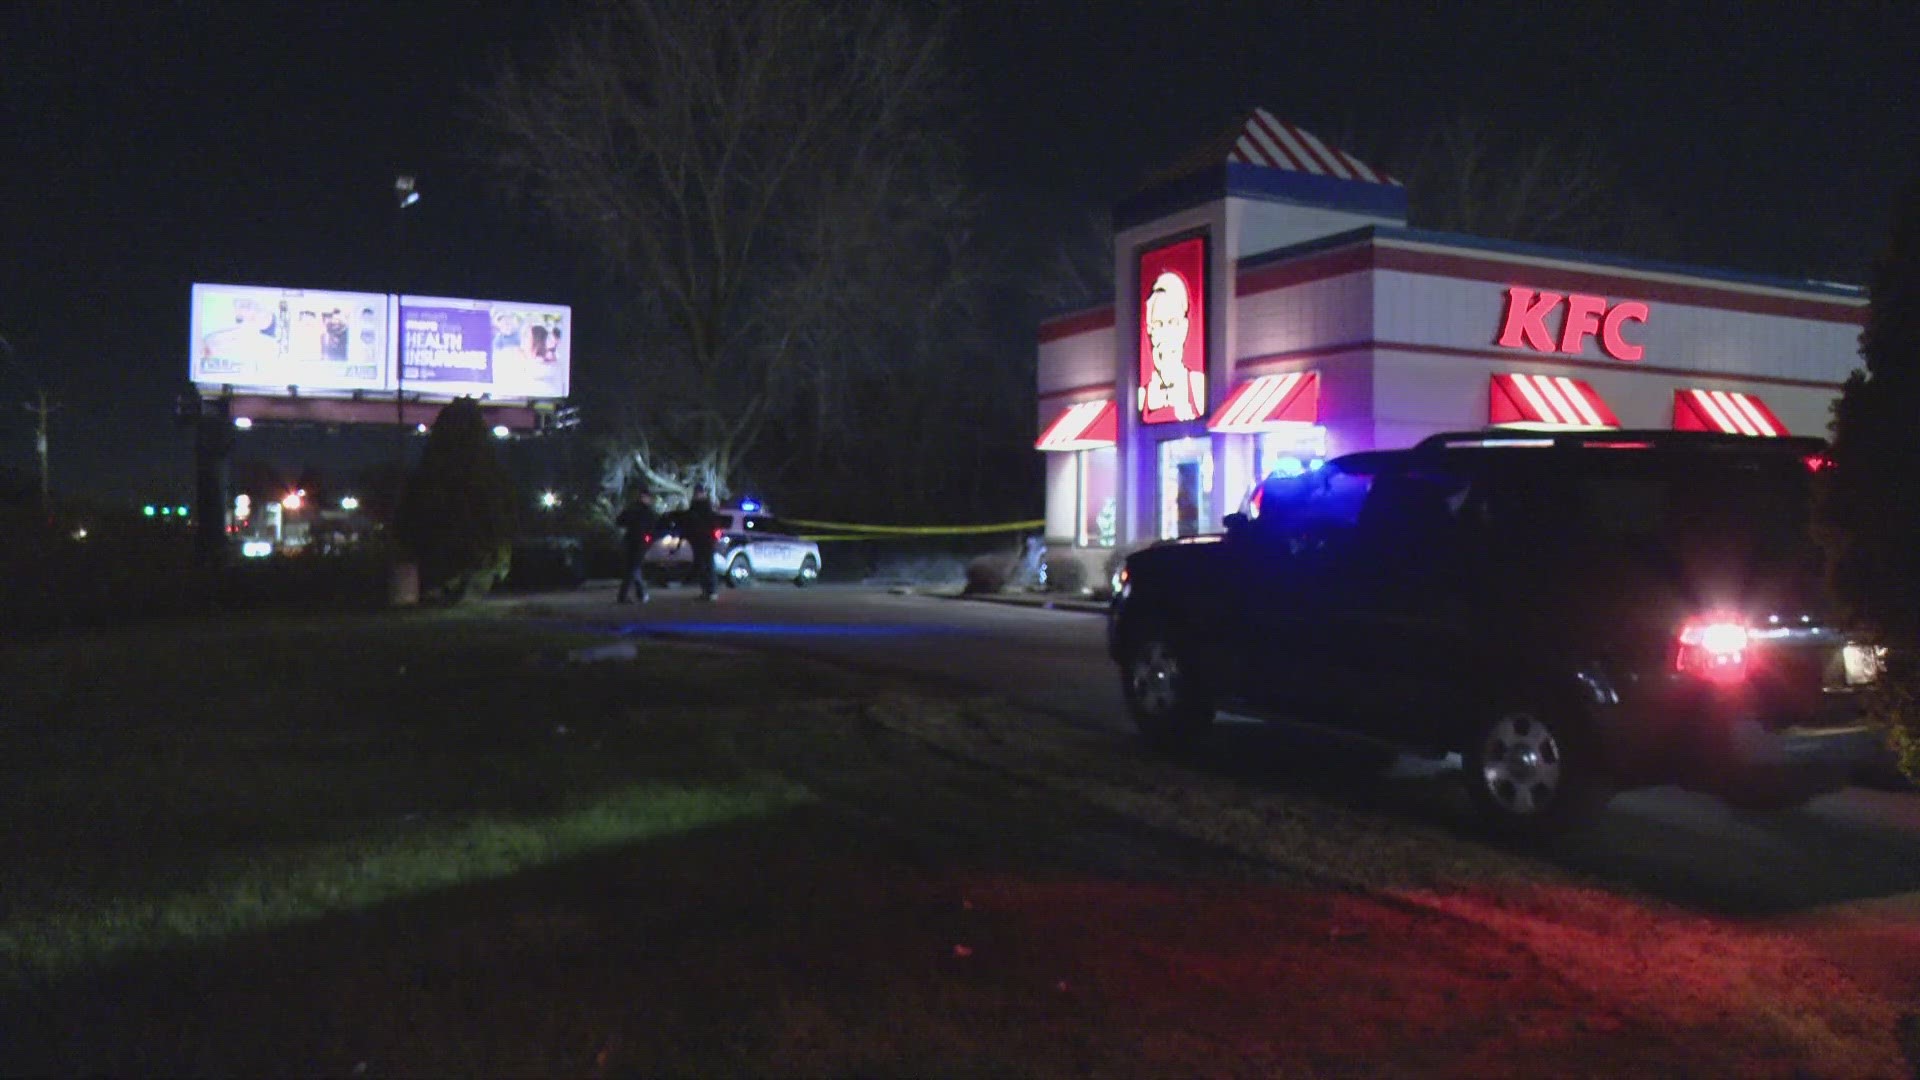 Police say the 24-year-old suspect was fired from the restaurant earlier in the day before returning.